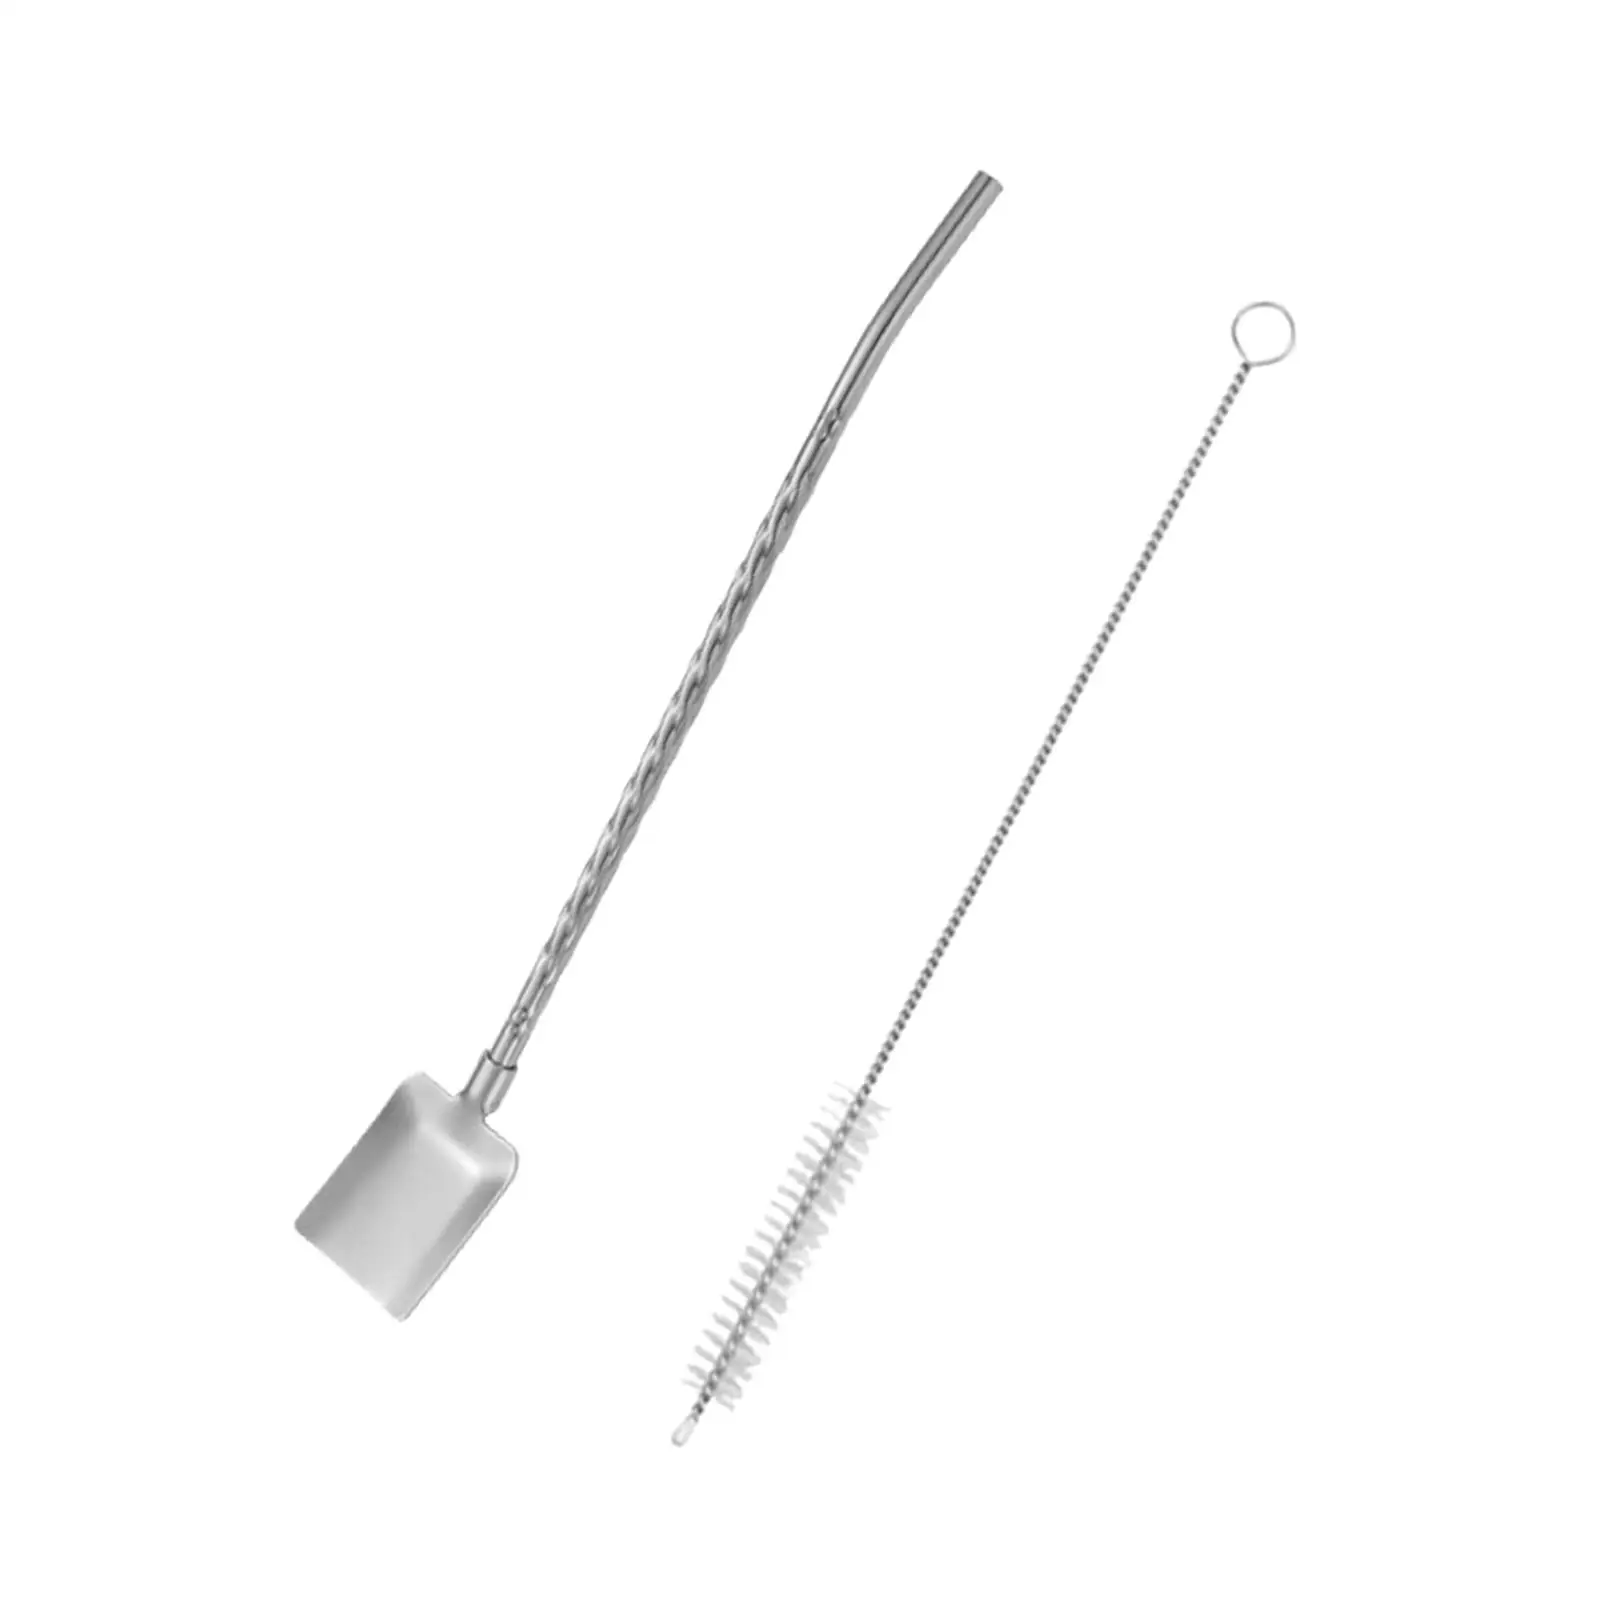 Reusable Straw with Long Cleaning Brush Long Handle Spoon Drinking Straw for Tea